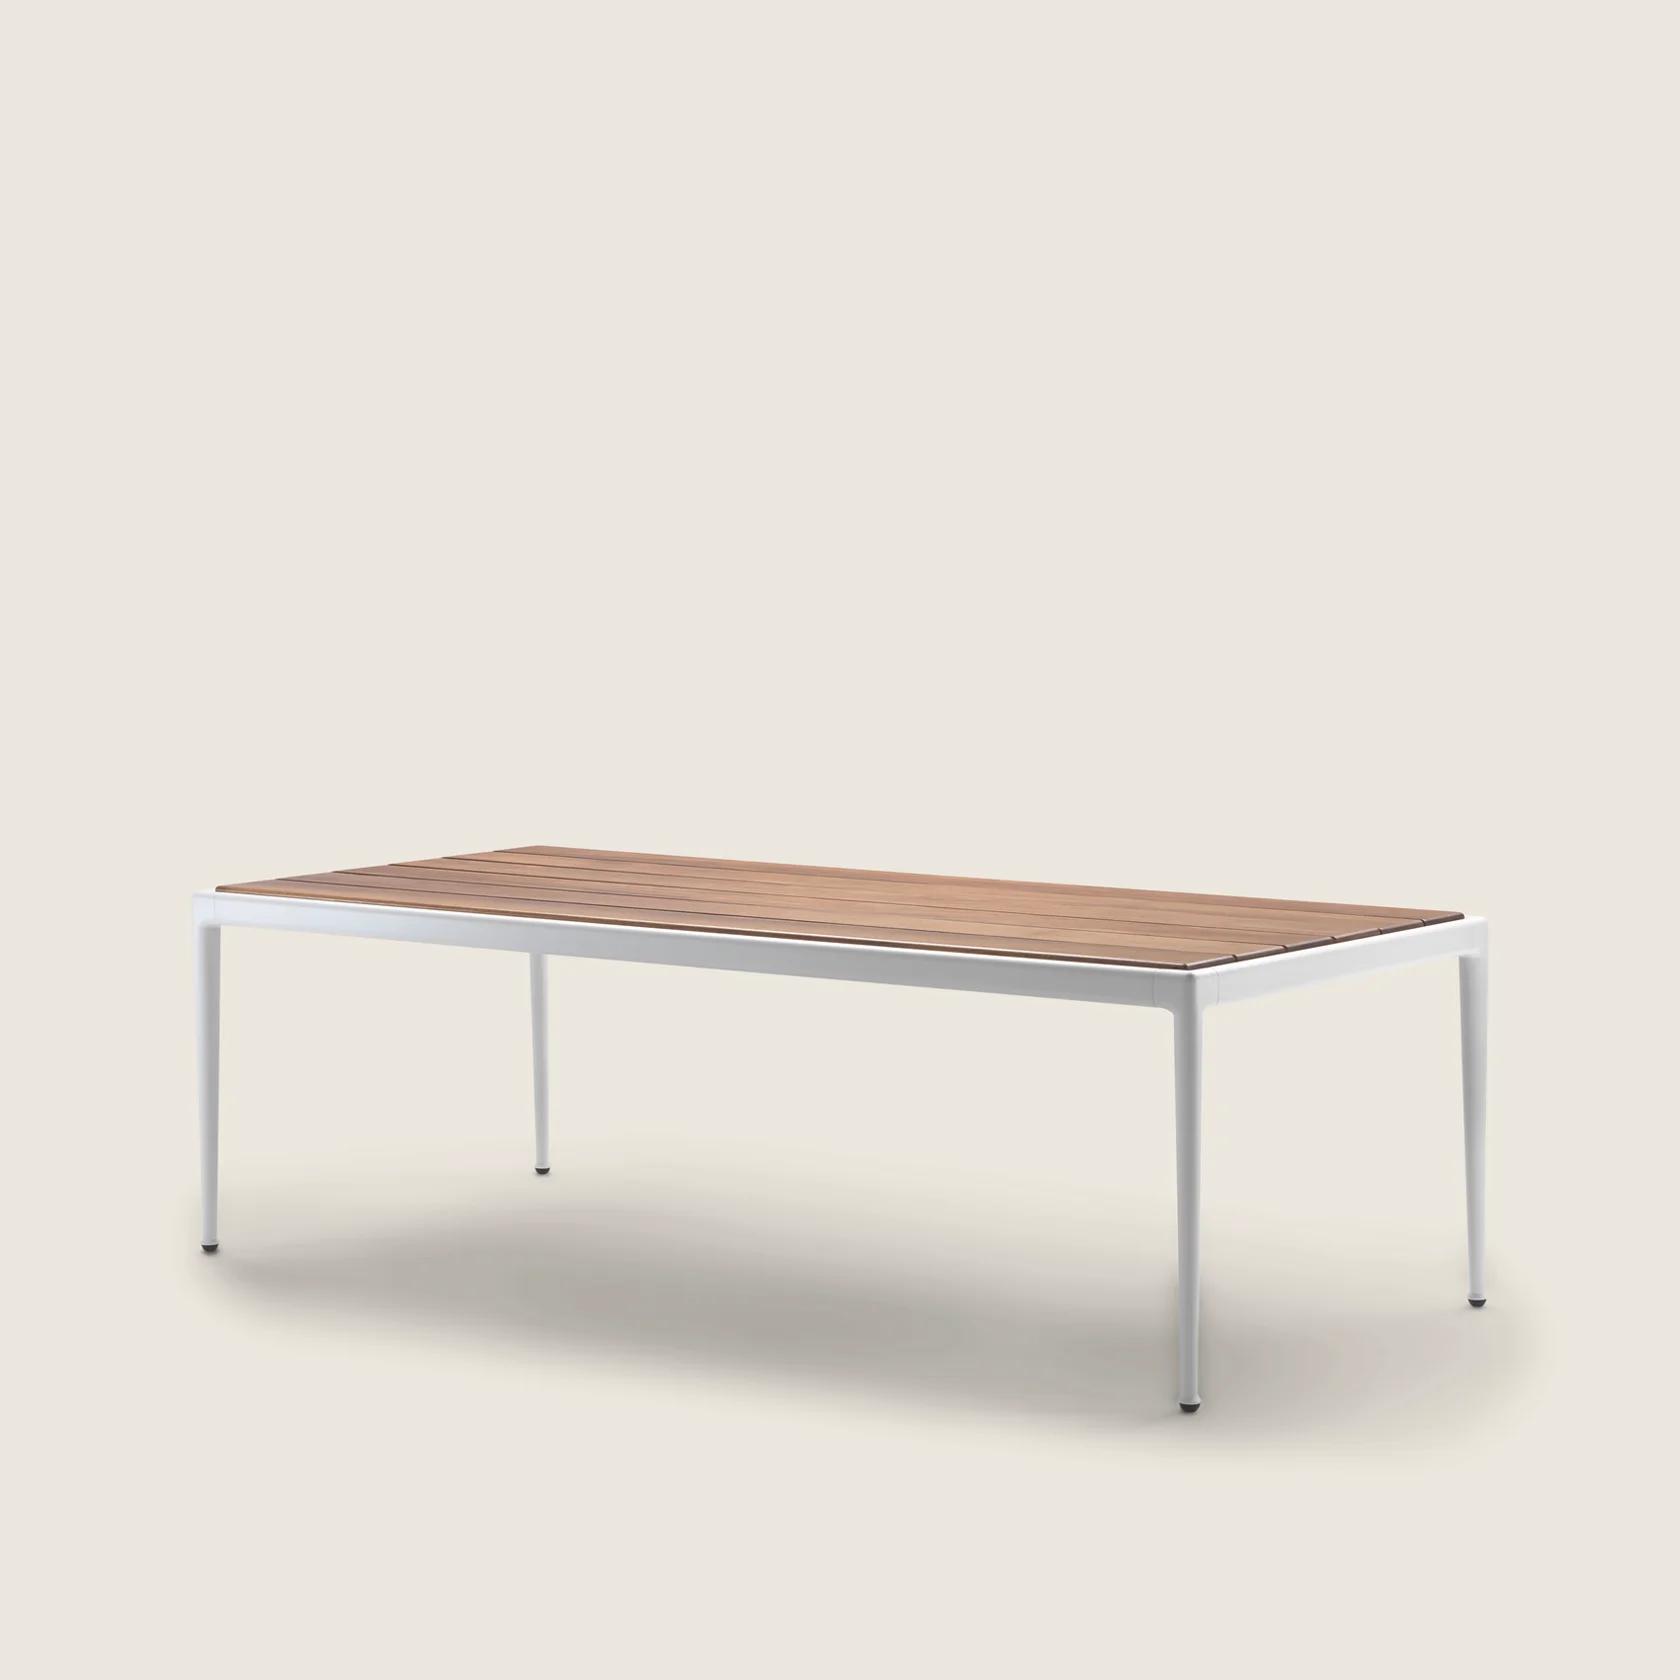 0283L0_PICO OUTDOOR_TABLE_06.png